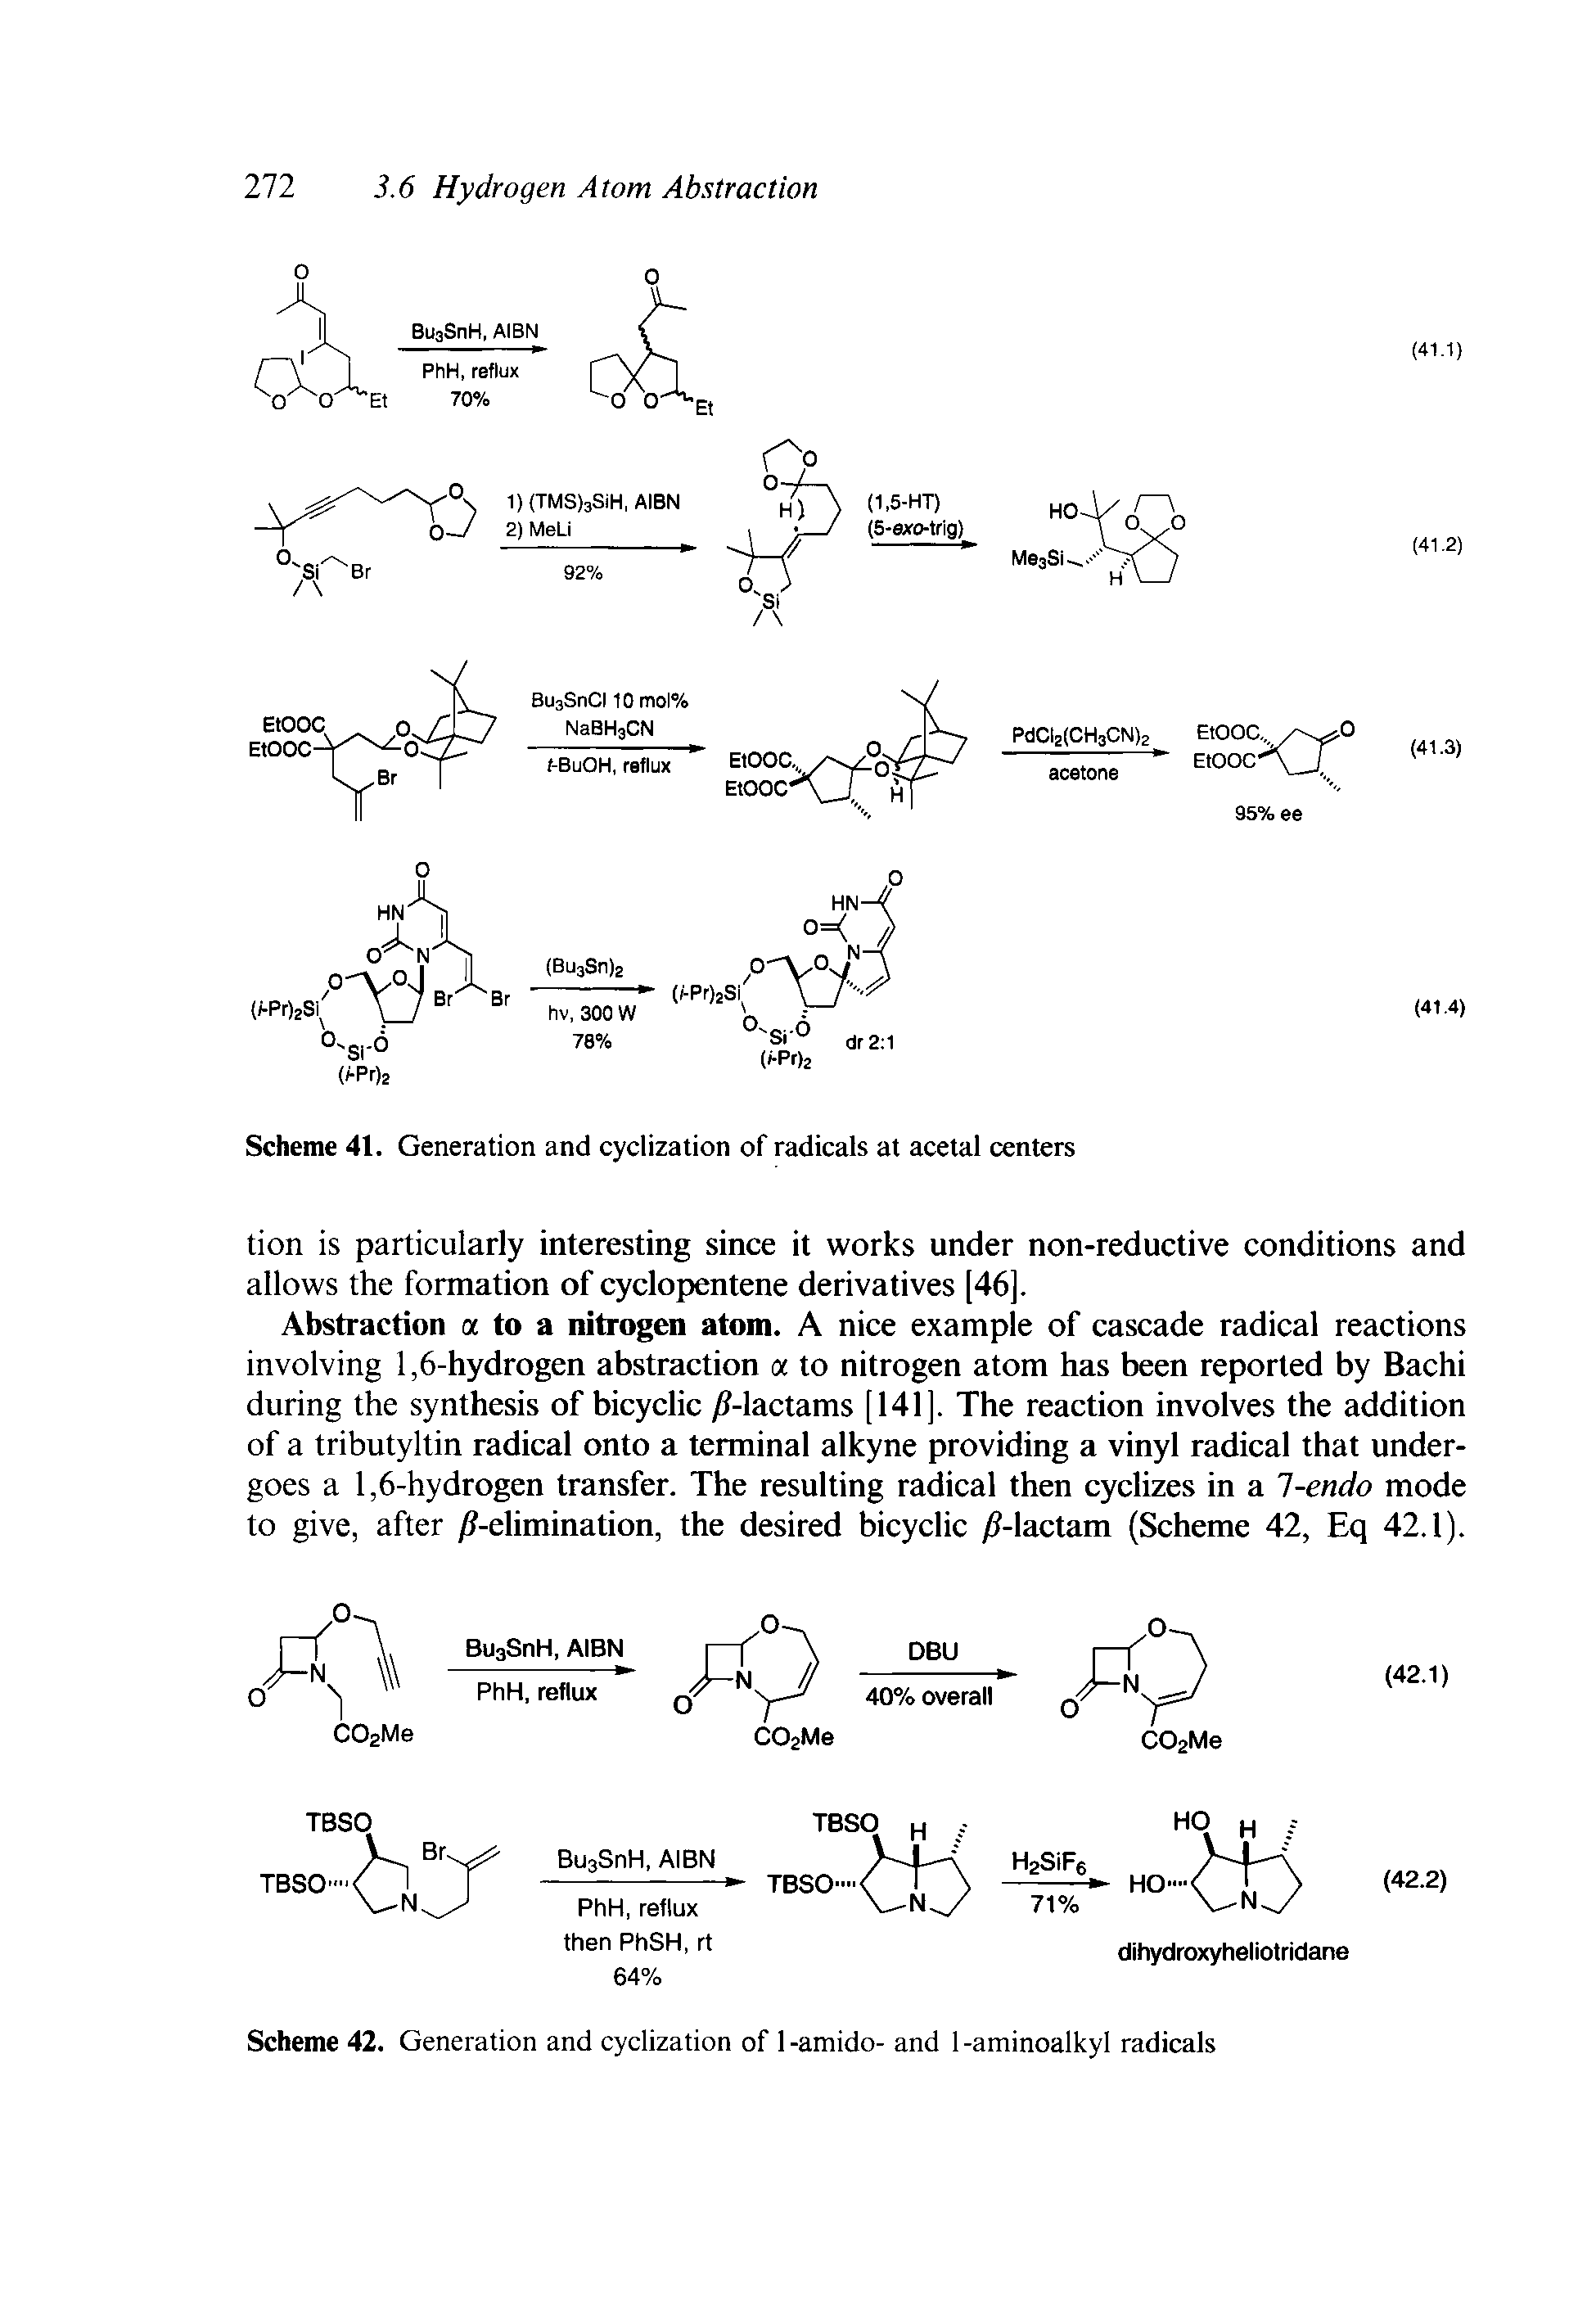 Scheme 41. Generation and cyclization of radicals at acetal centers...